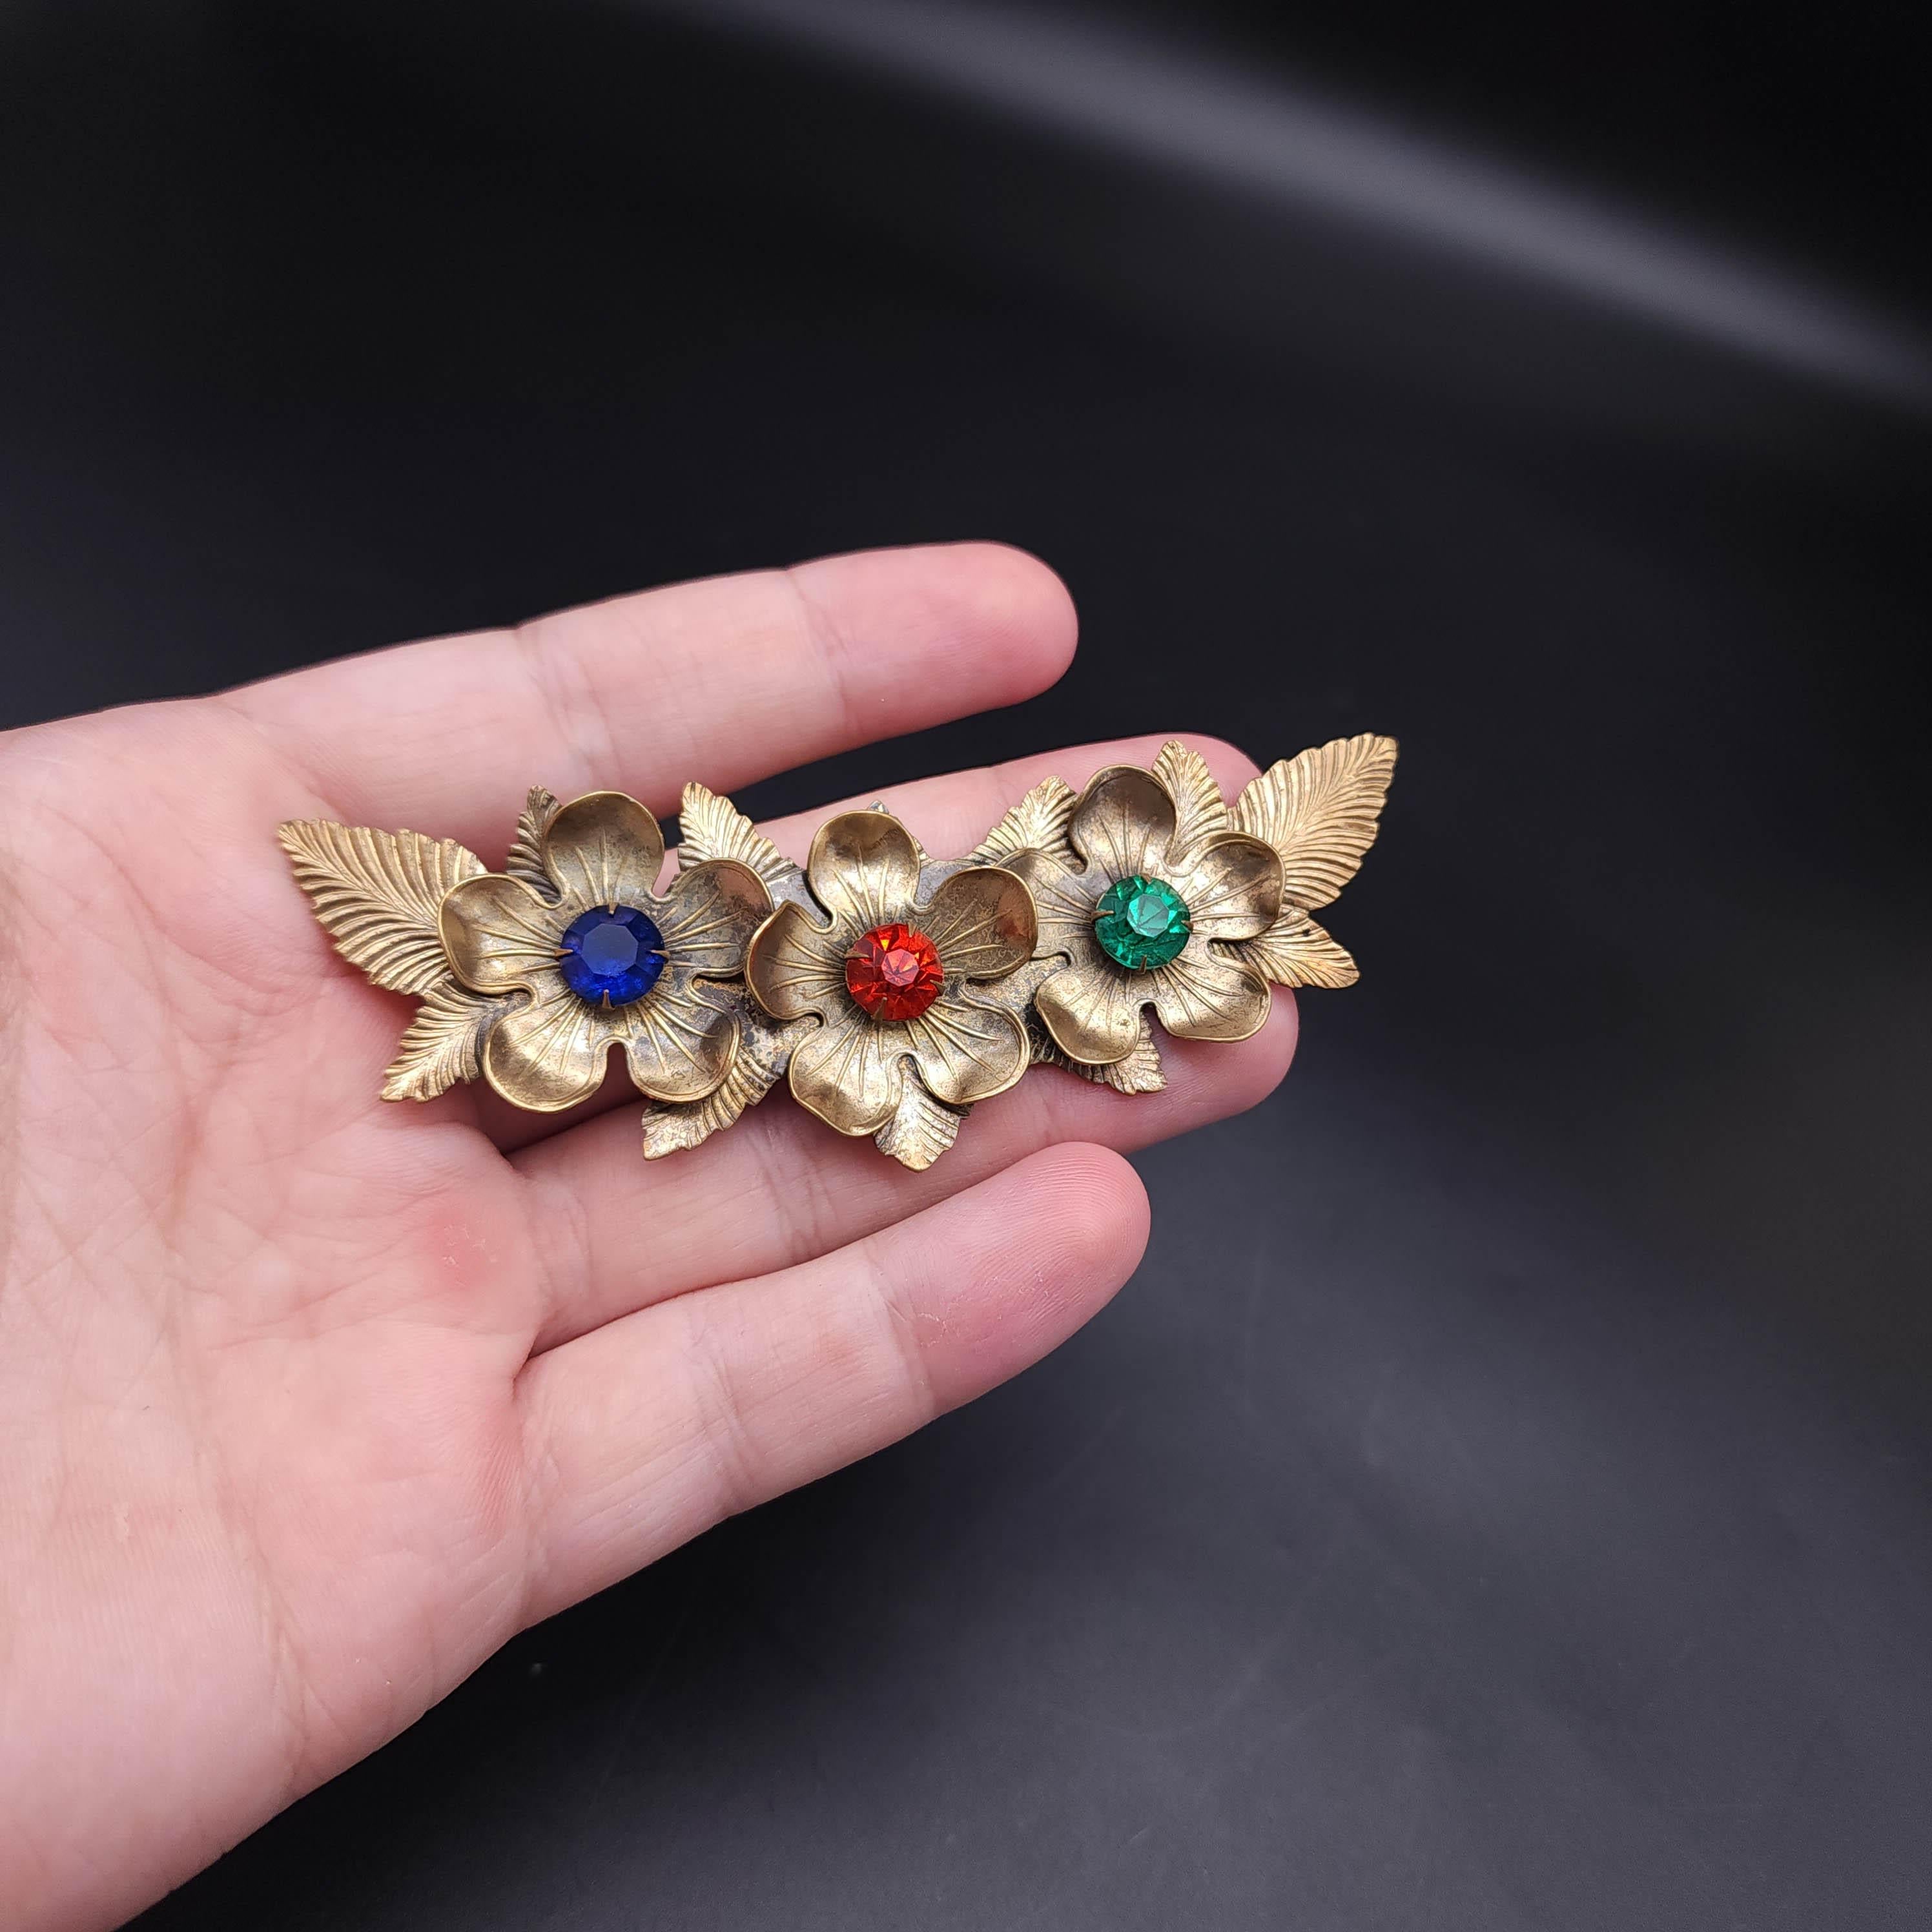 Antique Floral Pin with Multi-Colored Crystals, Early 1900s, Gold Plated In Excellent Condition For Sale In Milford, DE